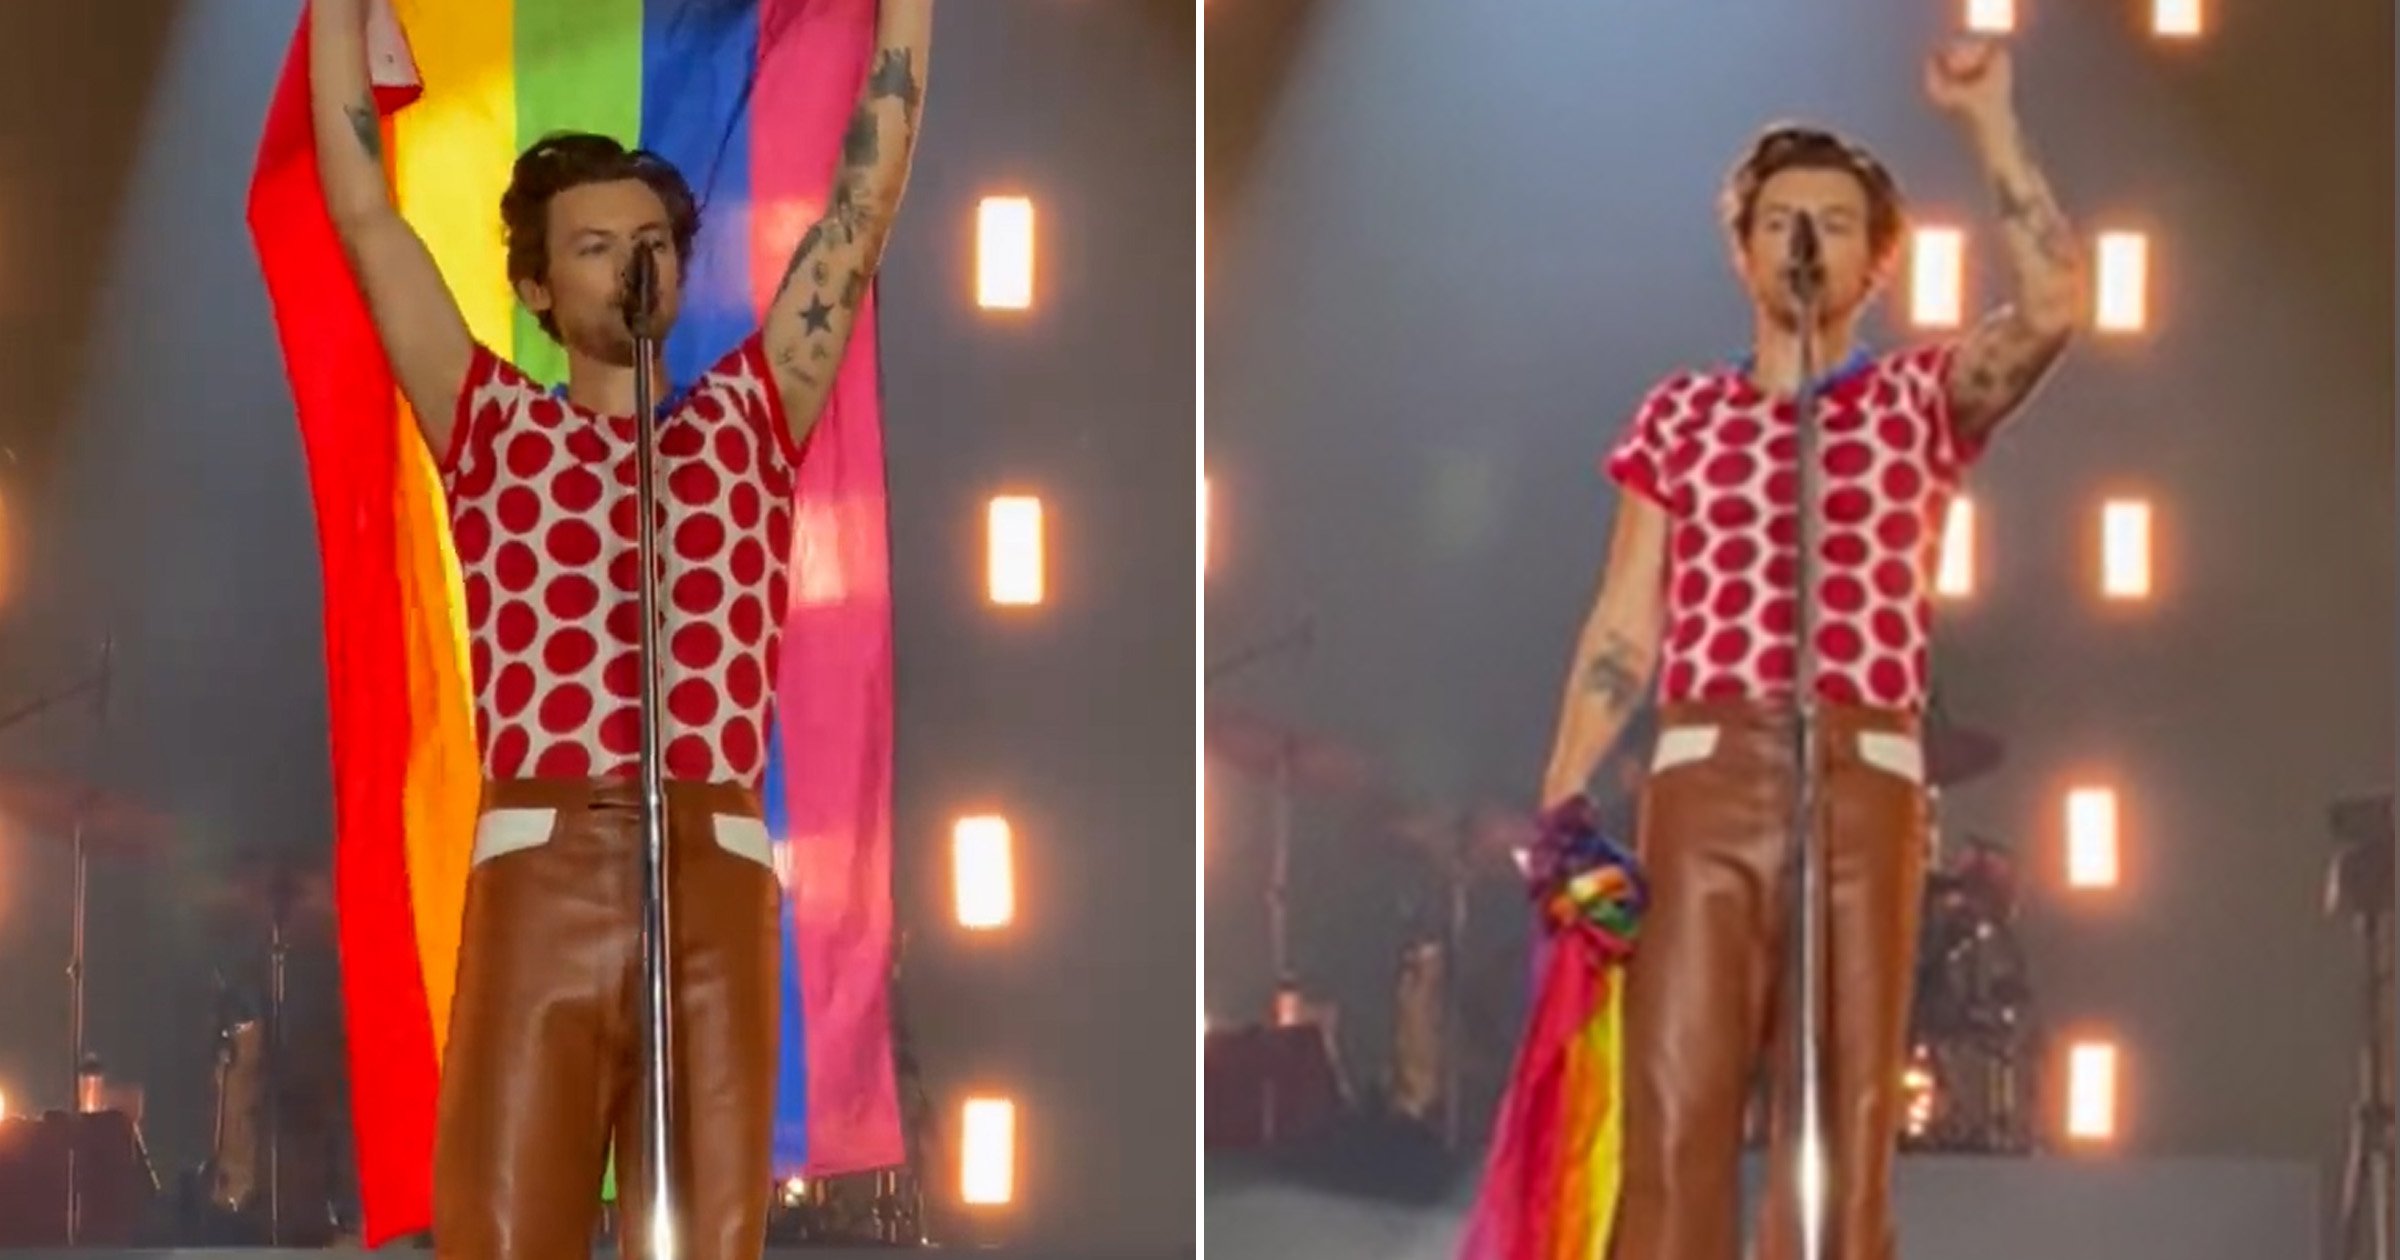 Harry Styles empowers fans with heartfelt speech on stage in Oslo following shooting at gay bar: ‘You are the future’